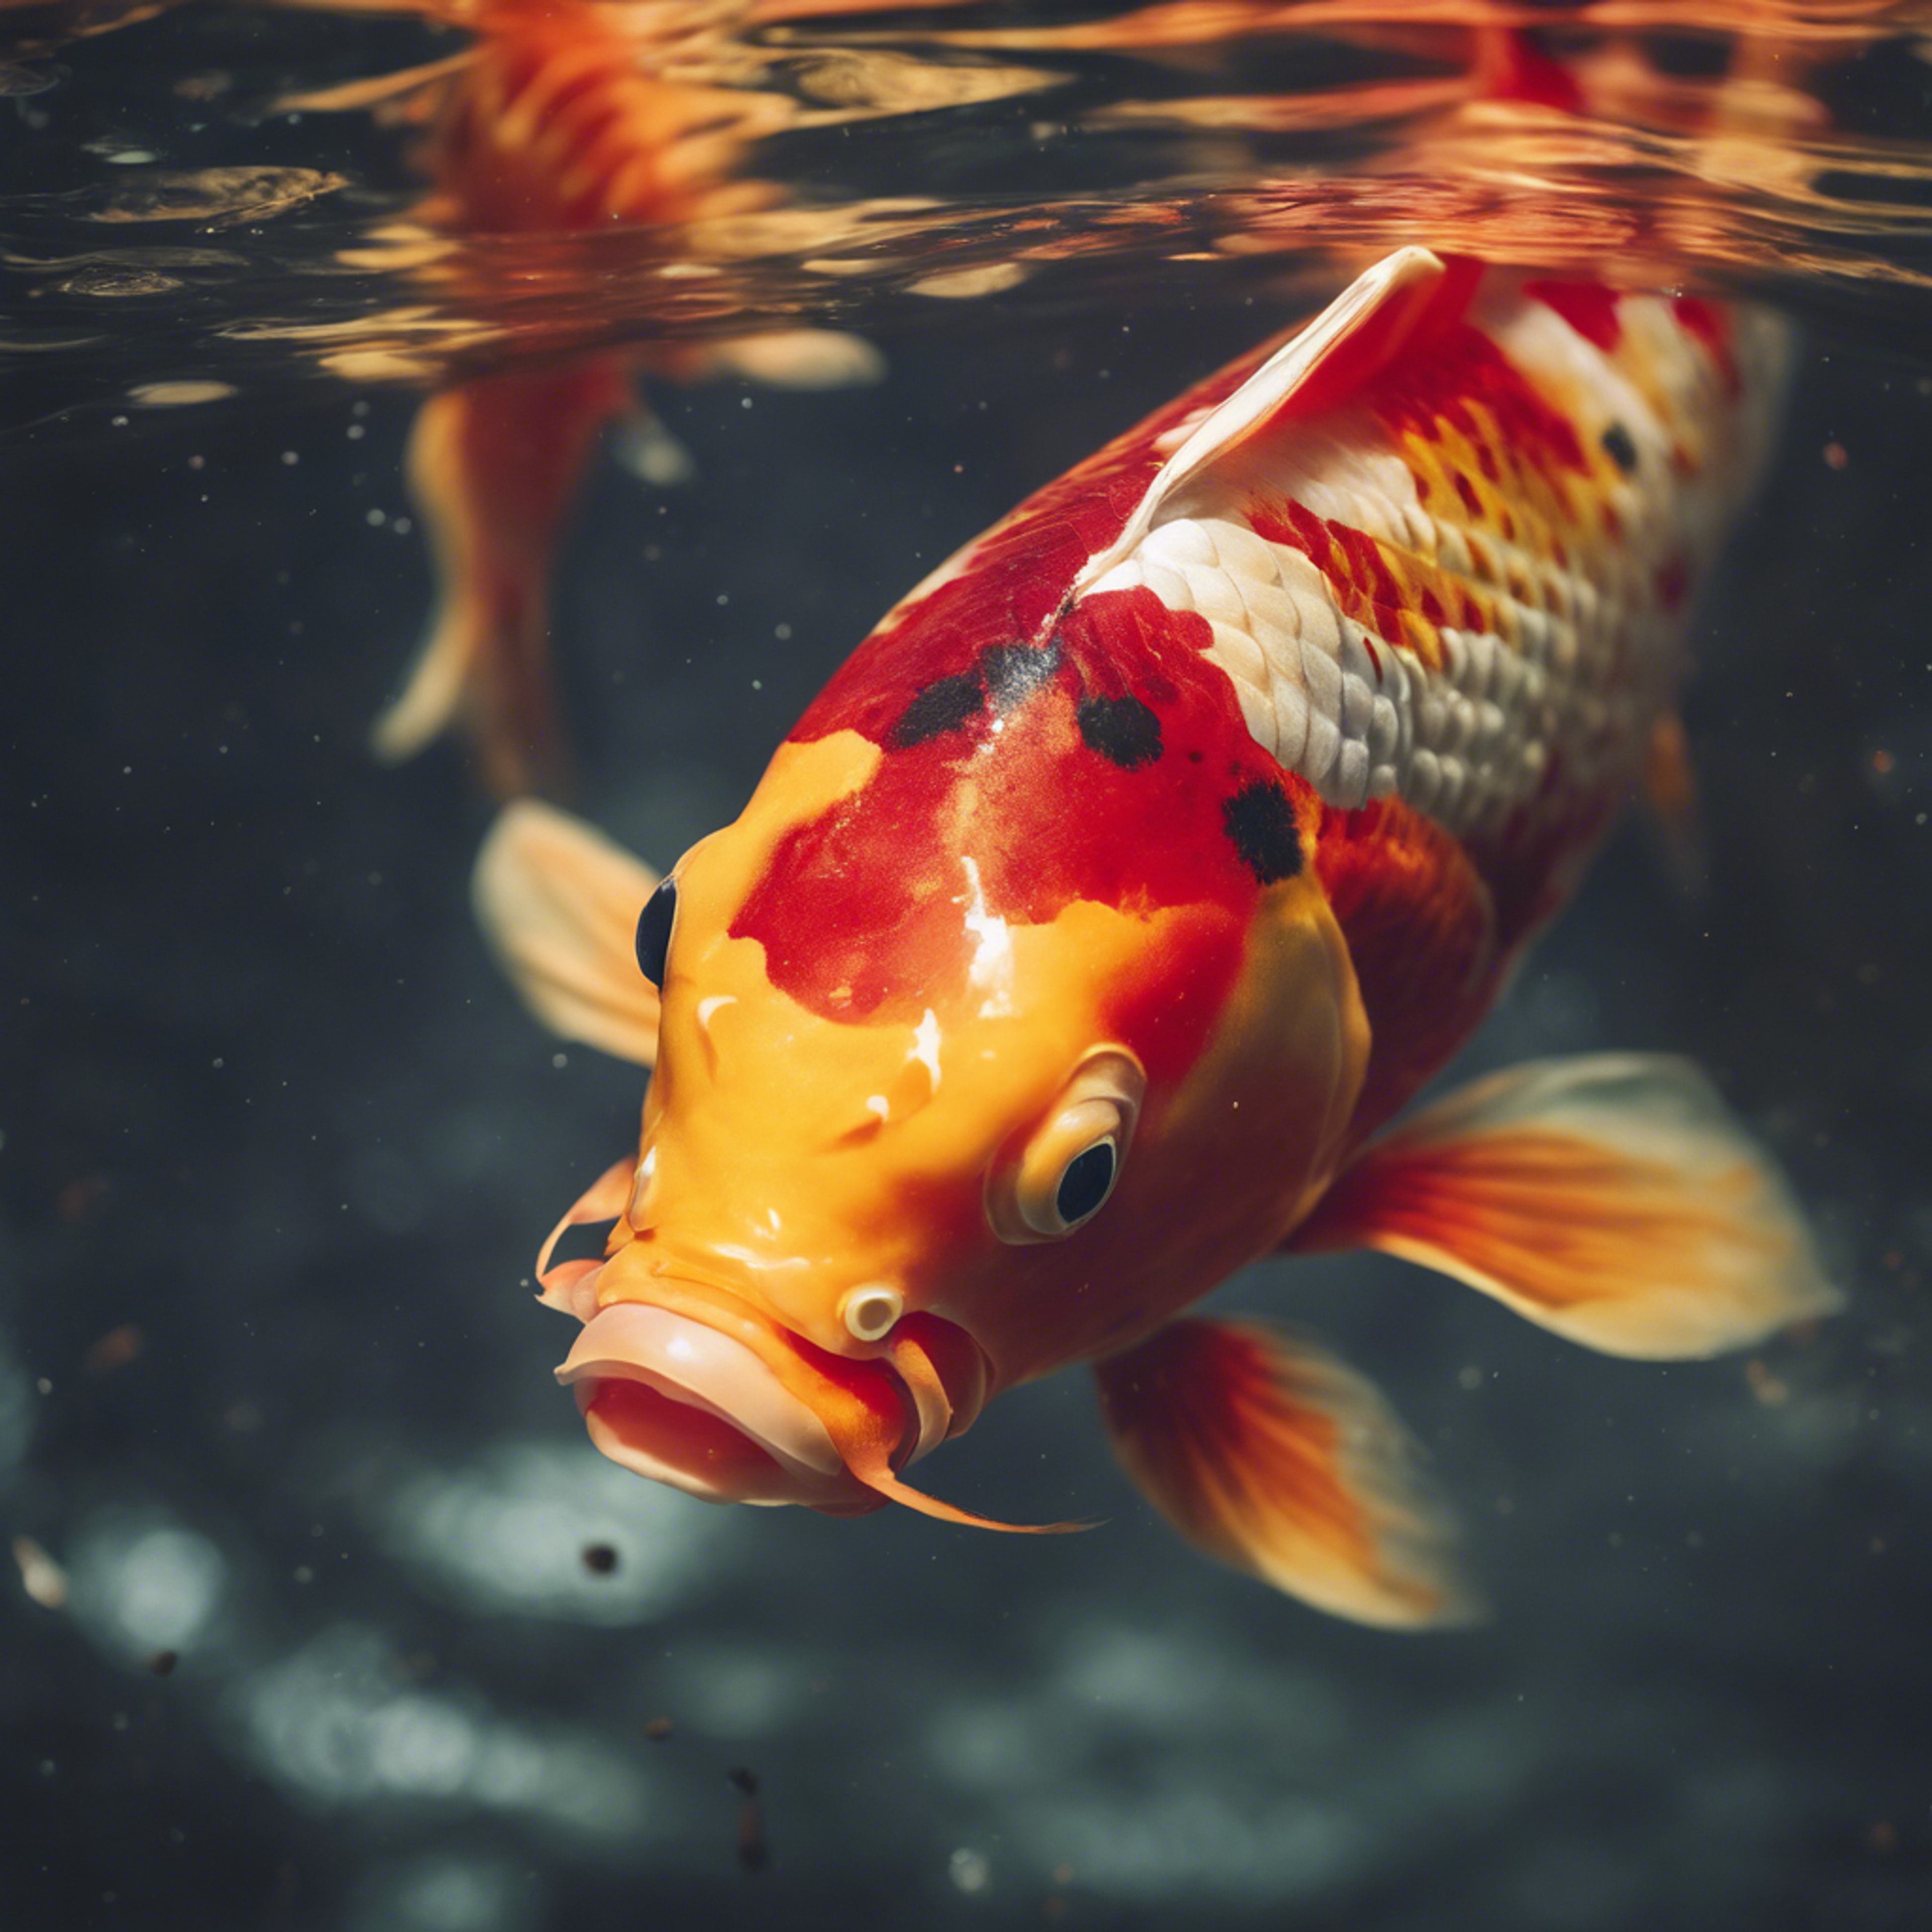 A vibrant red and gold koi fish swimming in a clear pond. Papel de parede[1dfeb98f60cb429caecb]